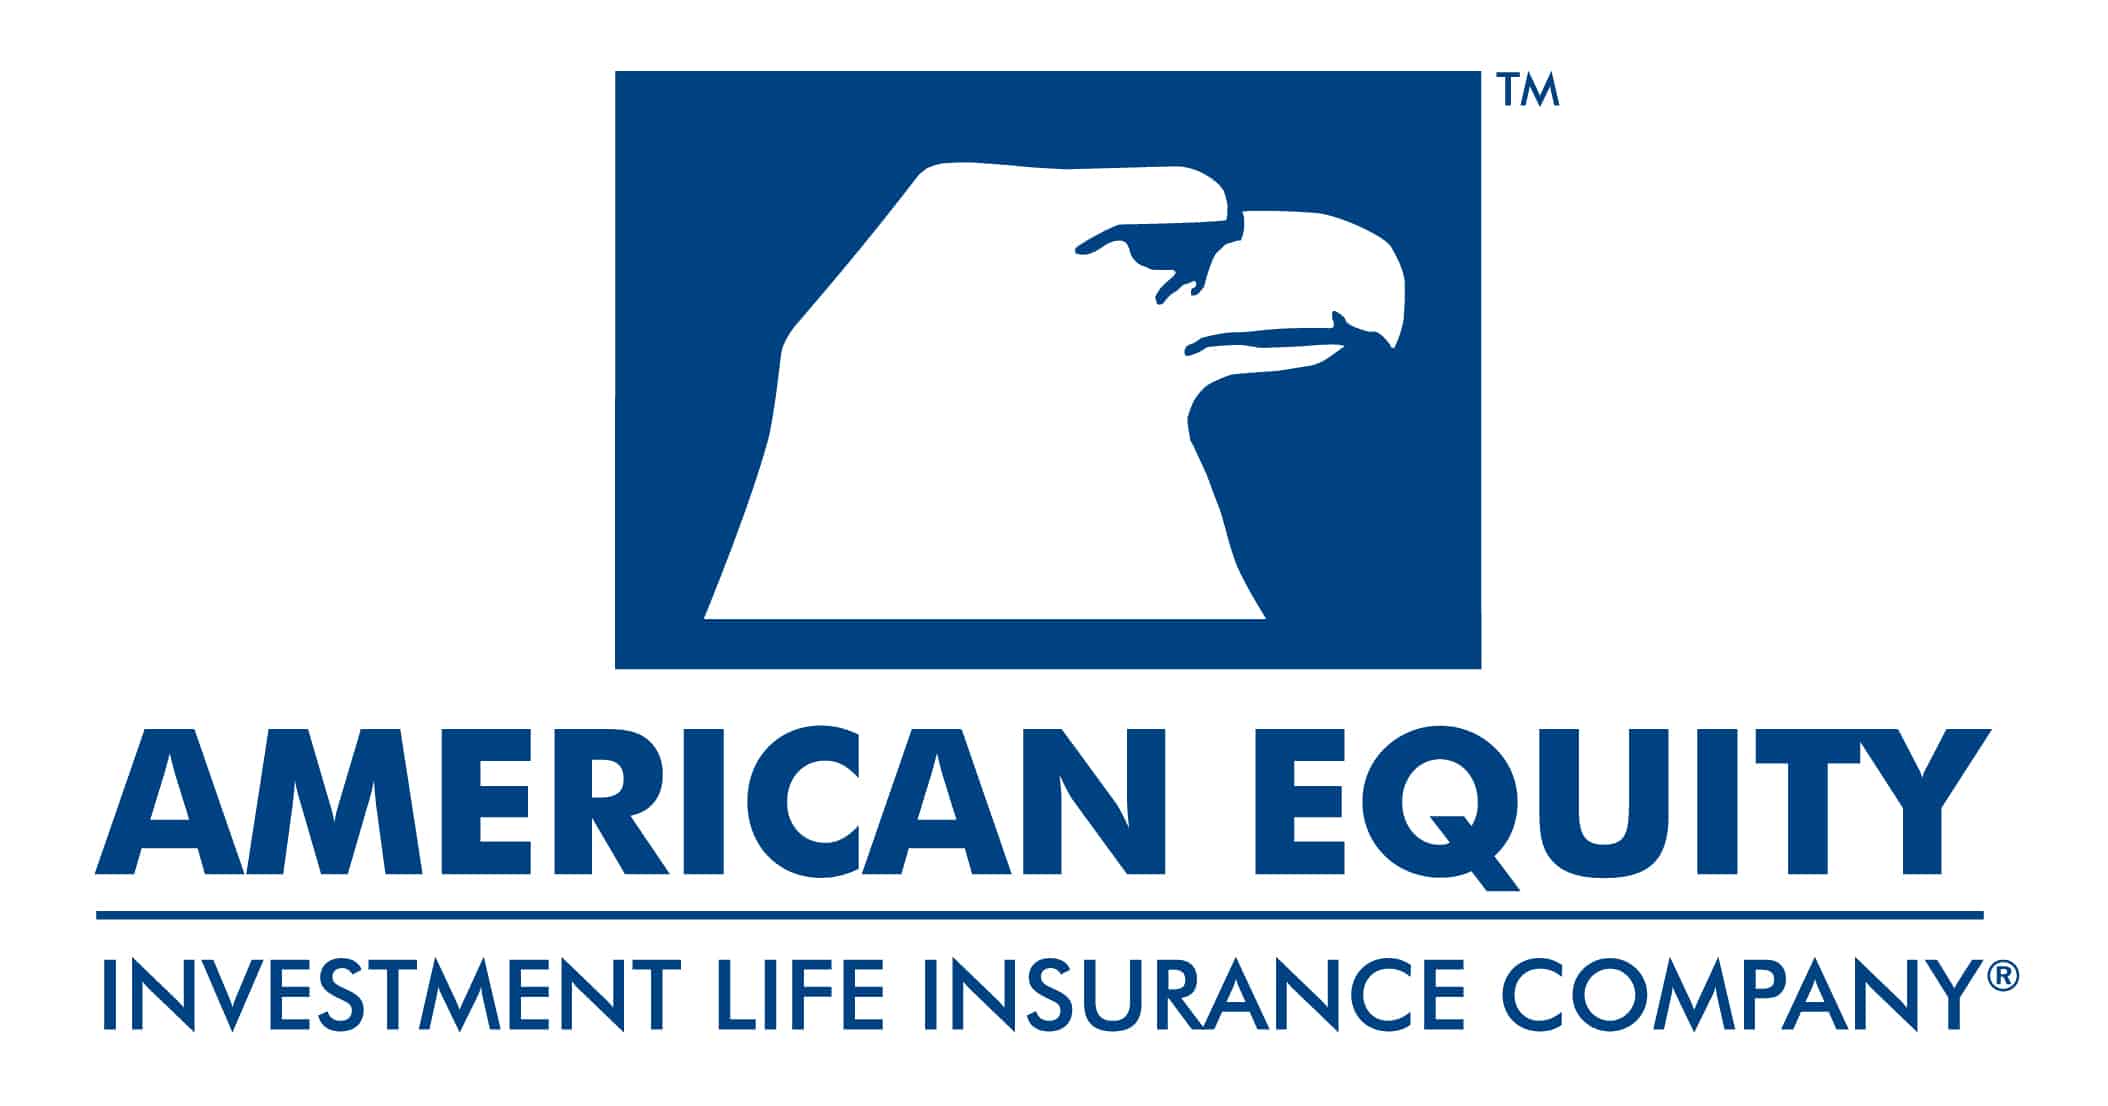 American Equity Investment Life Insurance